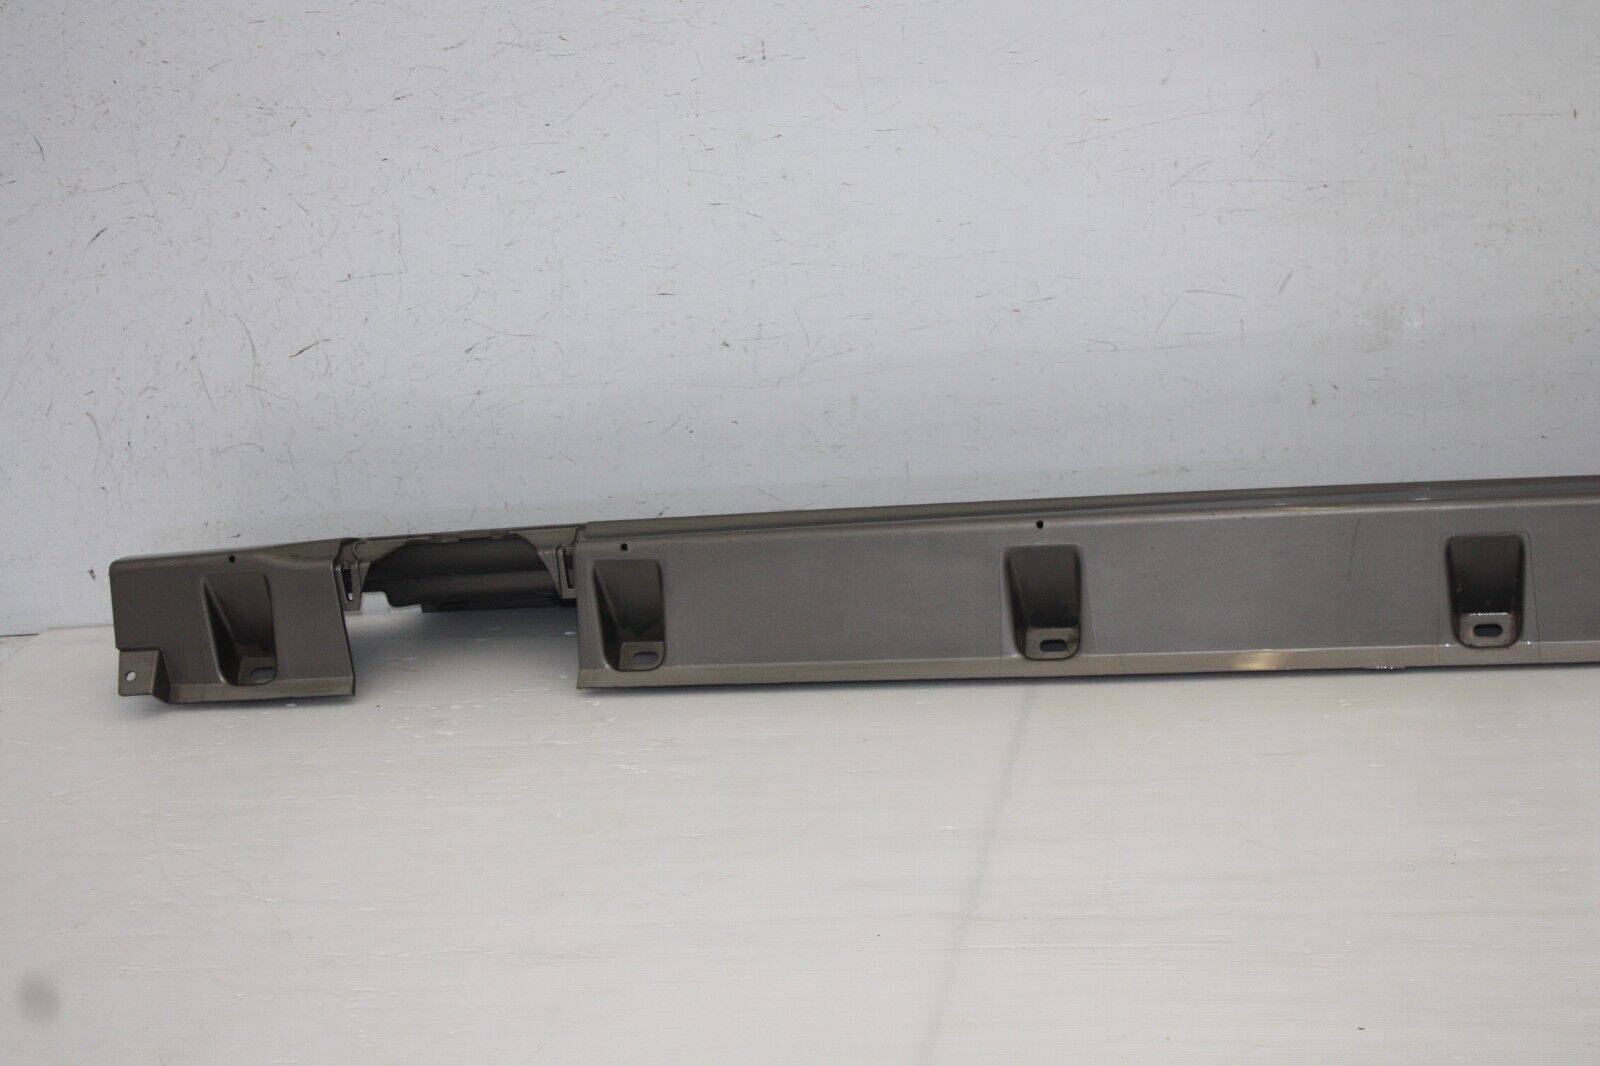 Range-Rover-Autobiography-Left-Side-Skirt-2009-TO-2012-BH4M-200B09-A-Genuine-175441196343-6